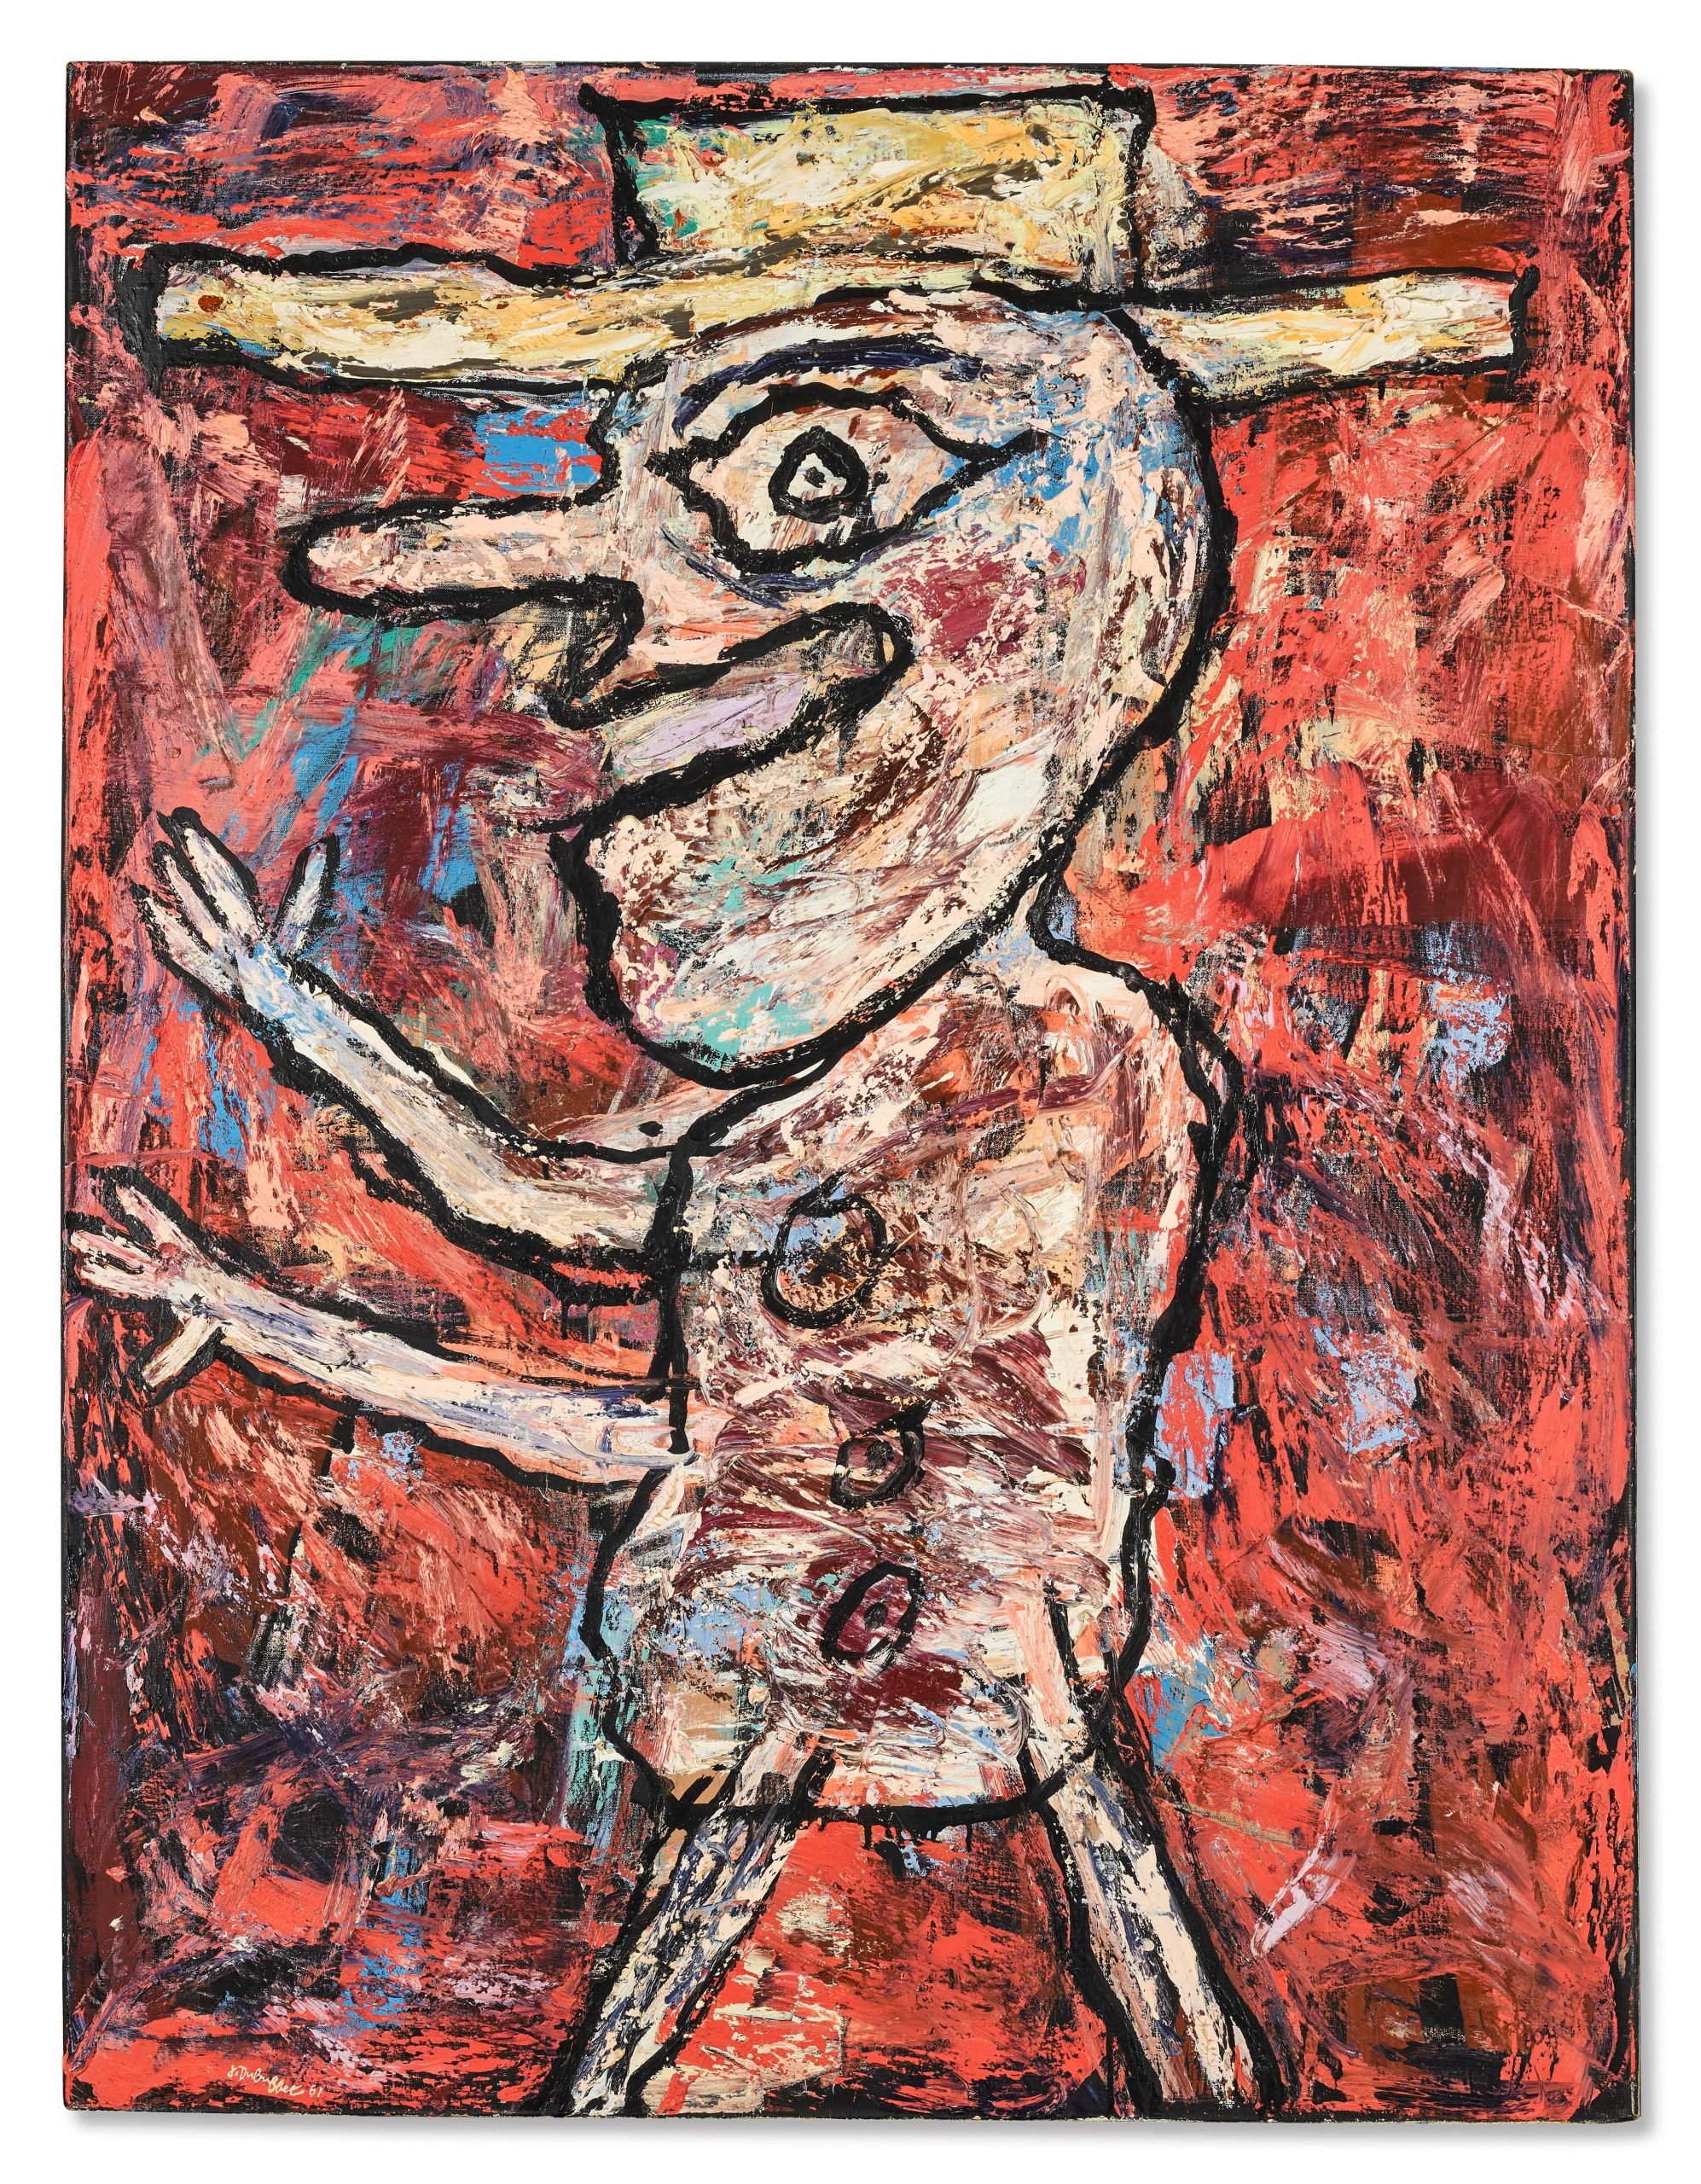 $8 Million Worth of Jean Dubuffet Works Head to Sotheby's